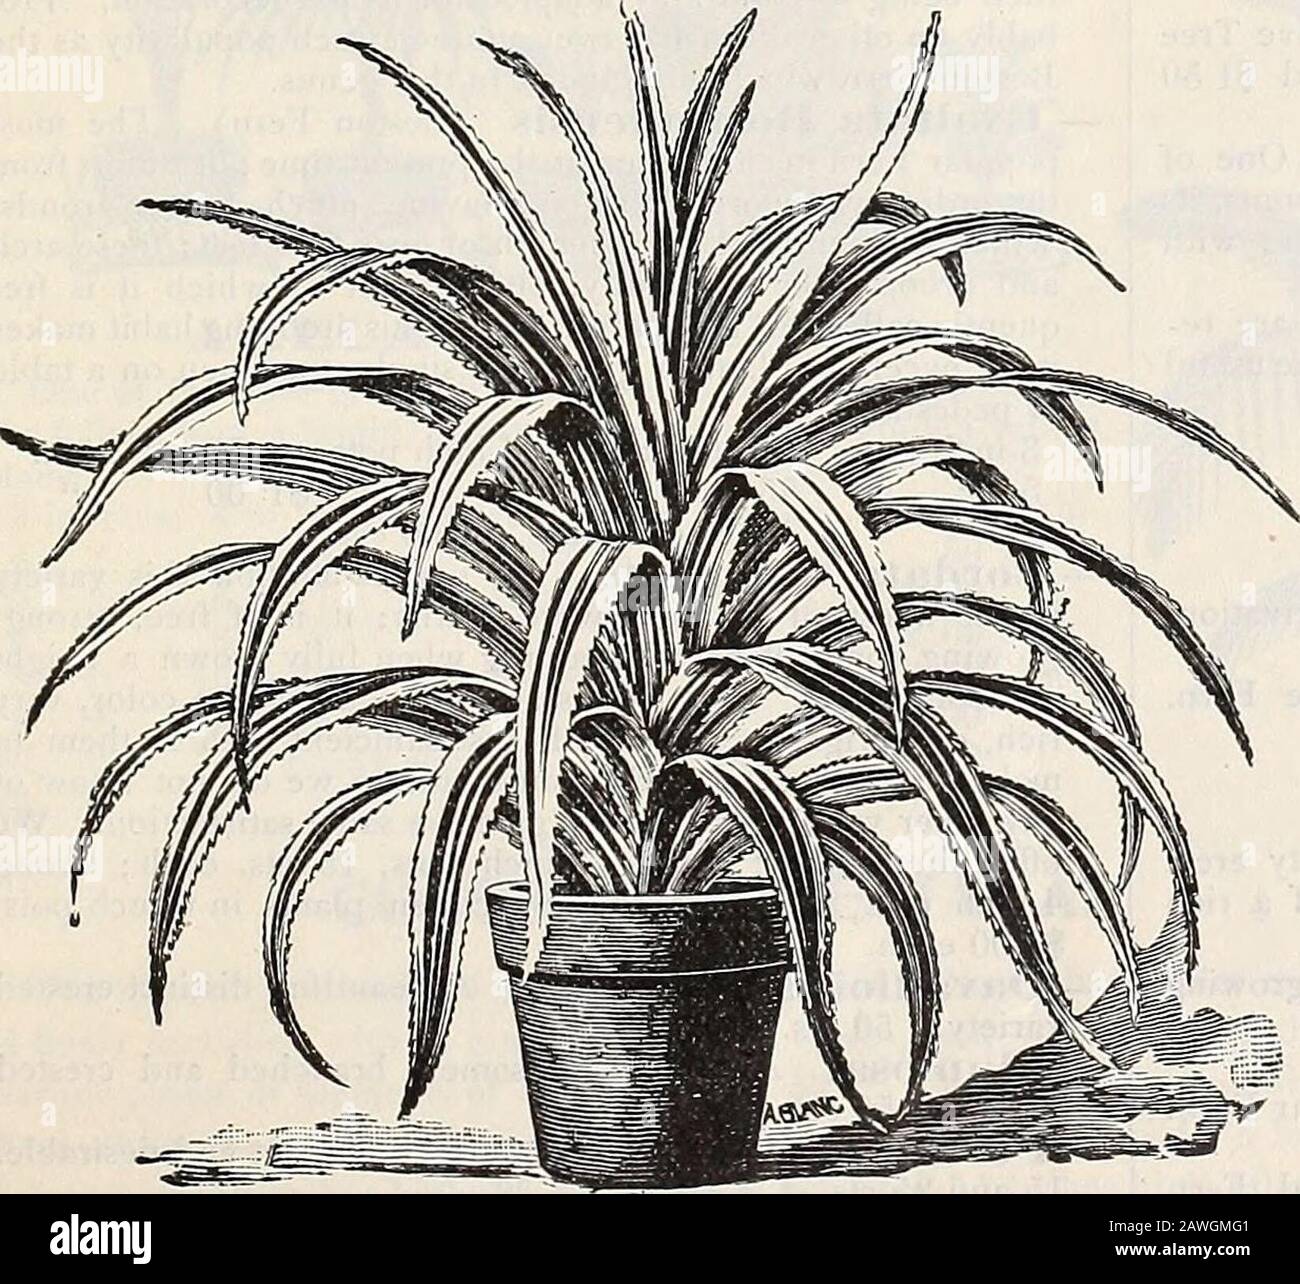 Dreer's autumn catalogue : 1899 bulbs plants, seeds, etc . Dkac.Ena Godseffiana. Drac.«na Lindeni. PANDANUS (Screw Pine). Utilis. This is one of tliemost useful of our ornamentalfoliage plants; excellent forthe centre of vases and bas-kets, or grown as a singlespecimen. Each. 3-in. pots, 8 in. high...$0 25 5 15 ... 1 00 6 18 ... 1 50 Veitclii. This is one of themost attractive of decorativeplants. The leaves are lightgreen, beautifully markedwith broad stripes of purewhite, and gracefully curved. Each.4-in. pots, 12 in. high . .. $1 OO 5 • 15 1 50 6 18 2 00. Pandanus Veitch:. MACROZAMFA ELEQAN Stock Photo